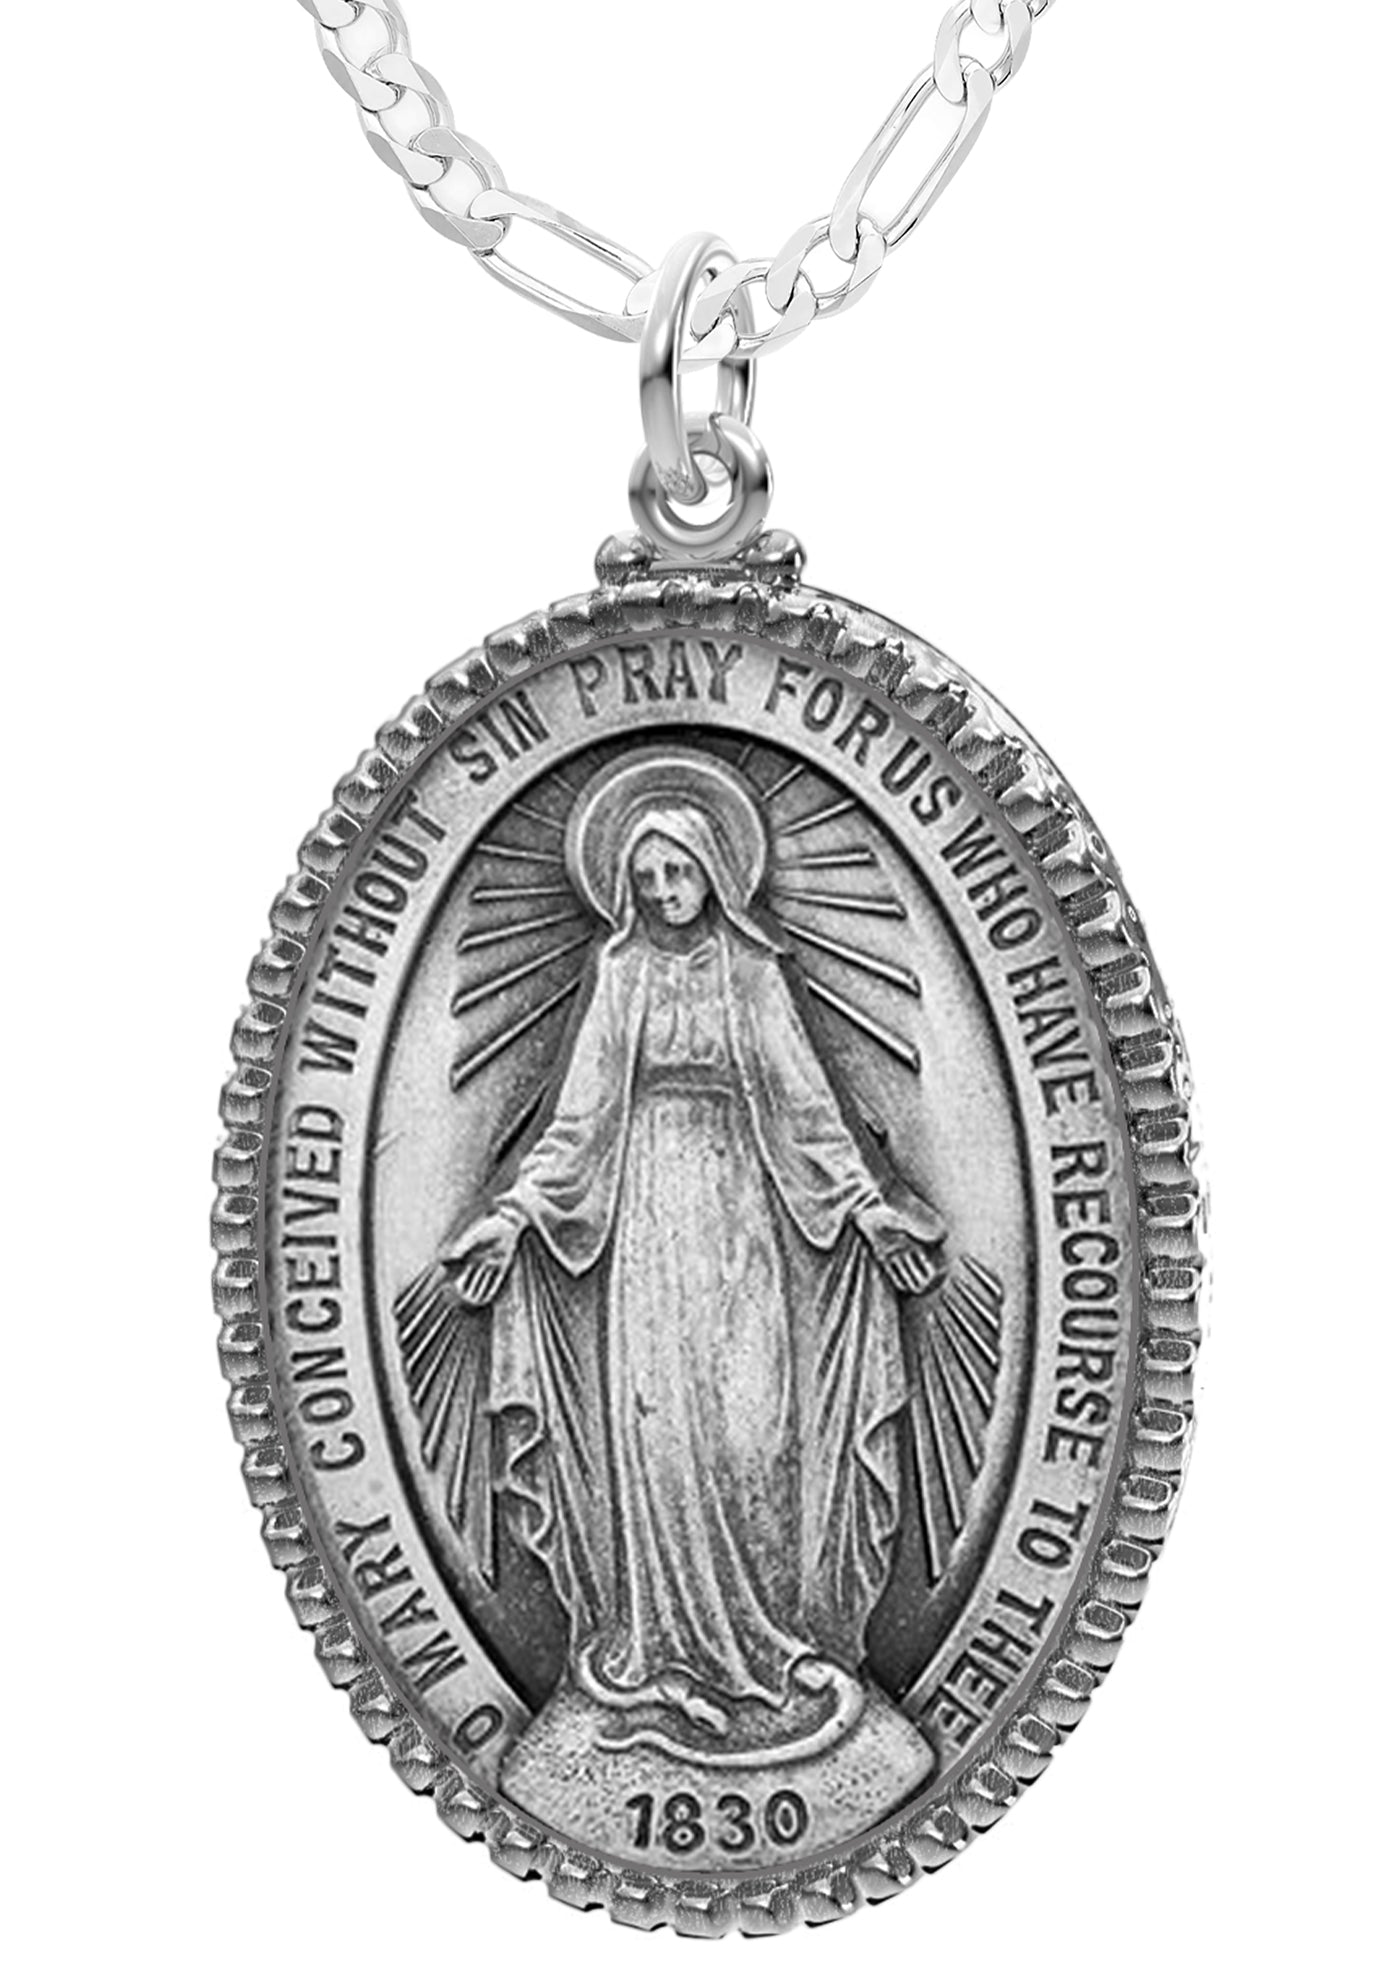 Virgin Mary Necklace - Silver Pendant in Antique Finish 20in 2.4mm Rope Chain